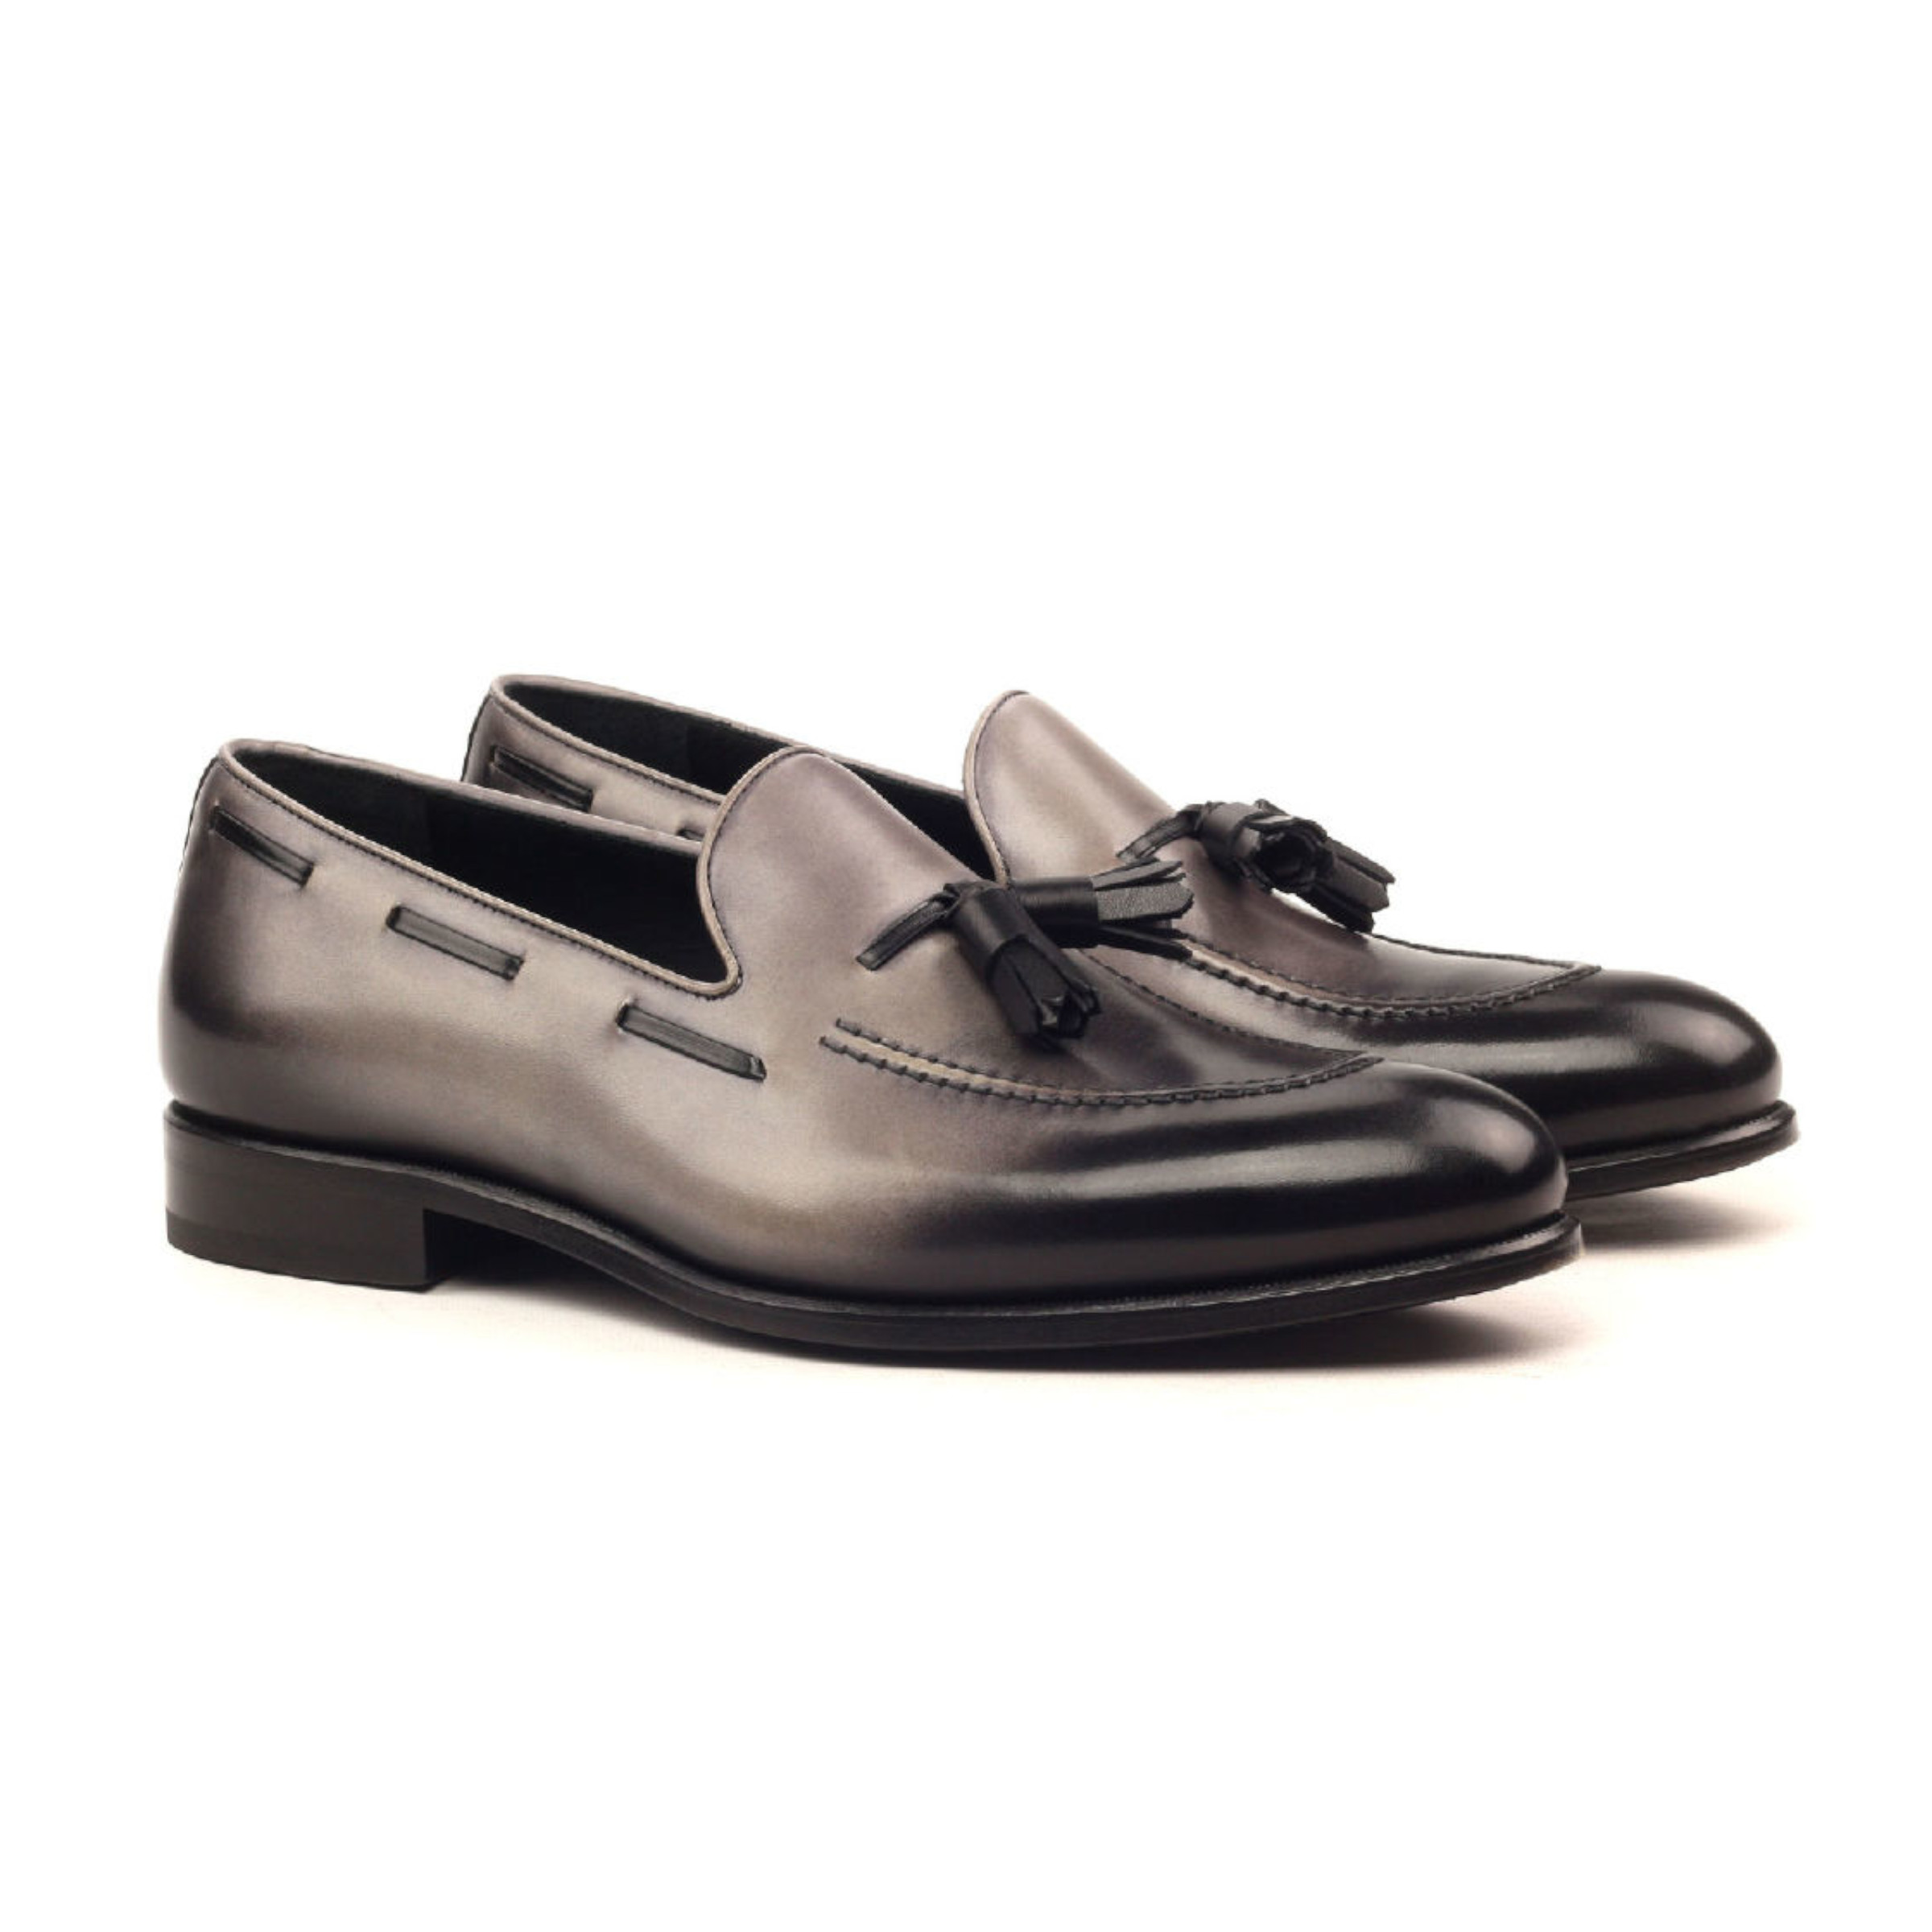 The Richmond: Bronze Calf. Loafers with grey and black painted calf leather and tassels, against a white background.